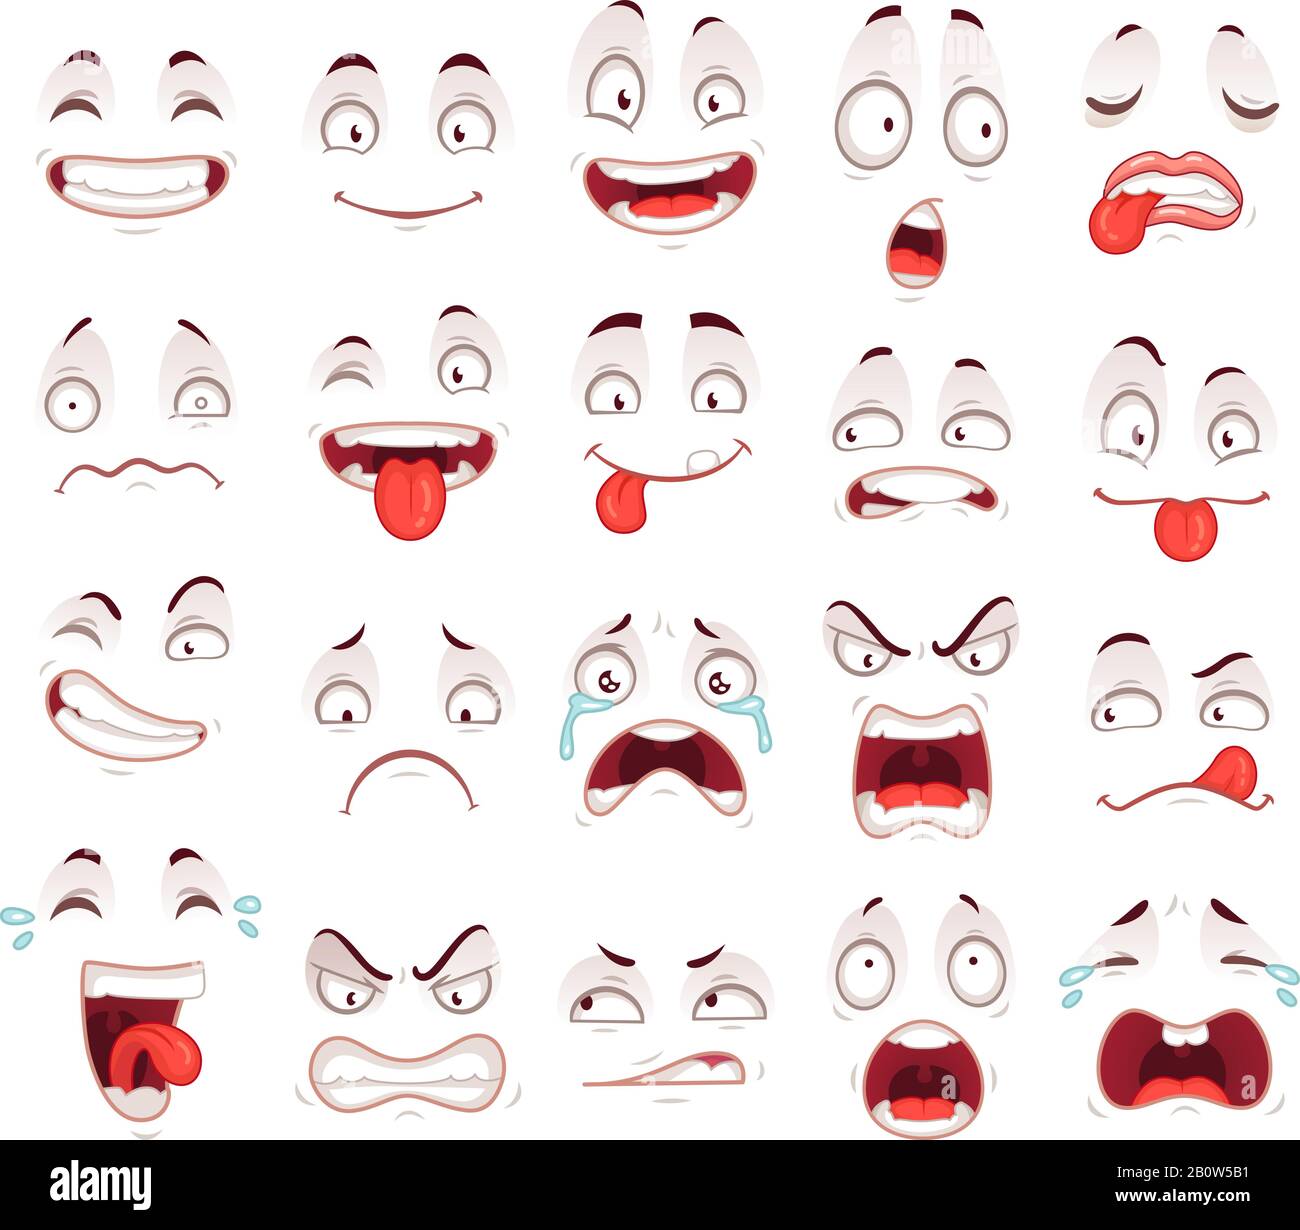 Cartoon faces. Happy excited smile laughing unhappy sad cry and scared face expressions. Expressive caricatures vector set Stock Vector